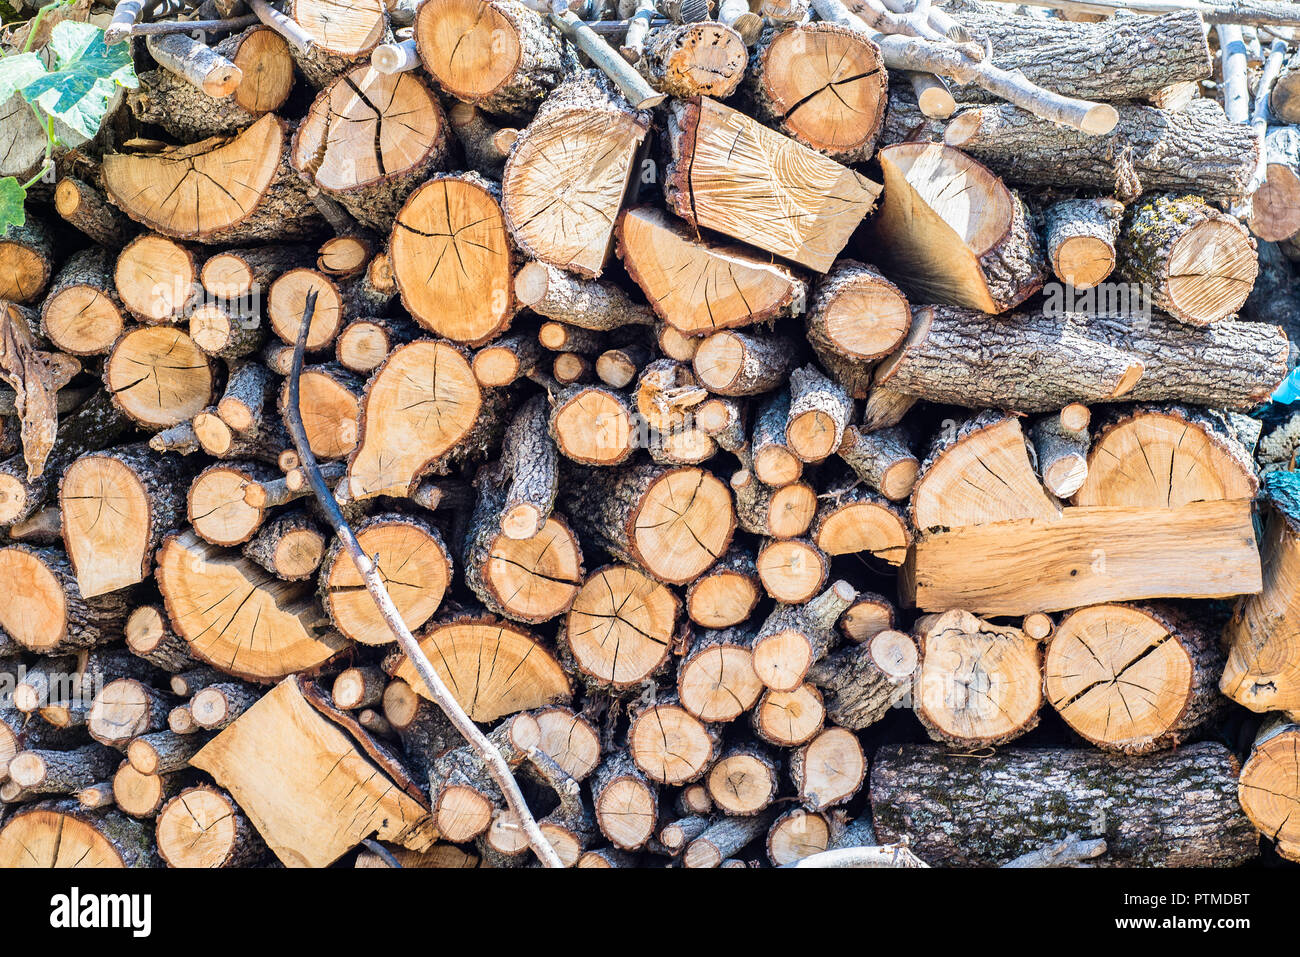 Dry irregularly chopped firewood logs stacked up on top of each other in a pile. Farm winter stock. Stock Photo